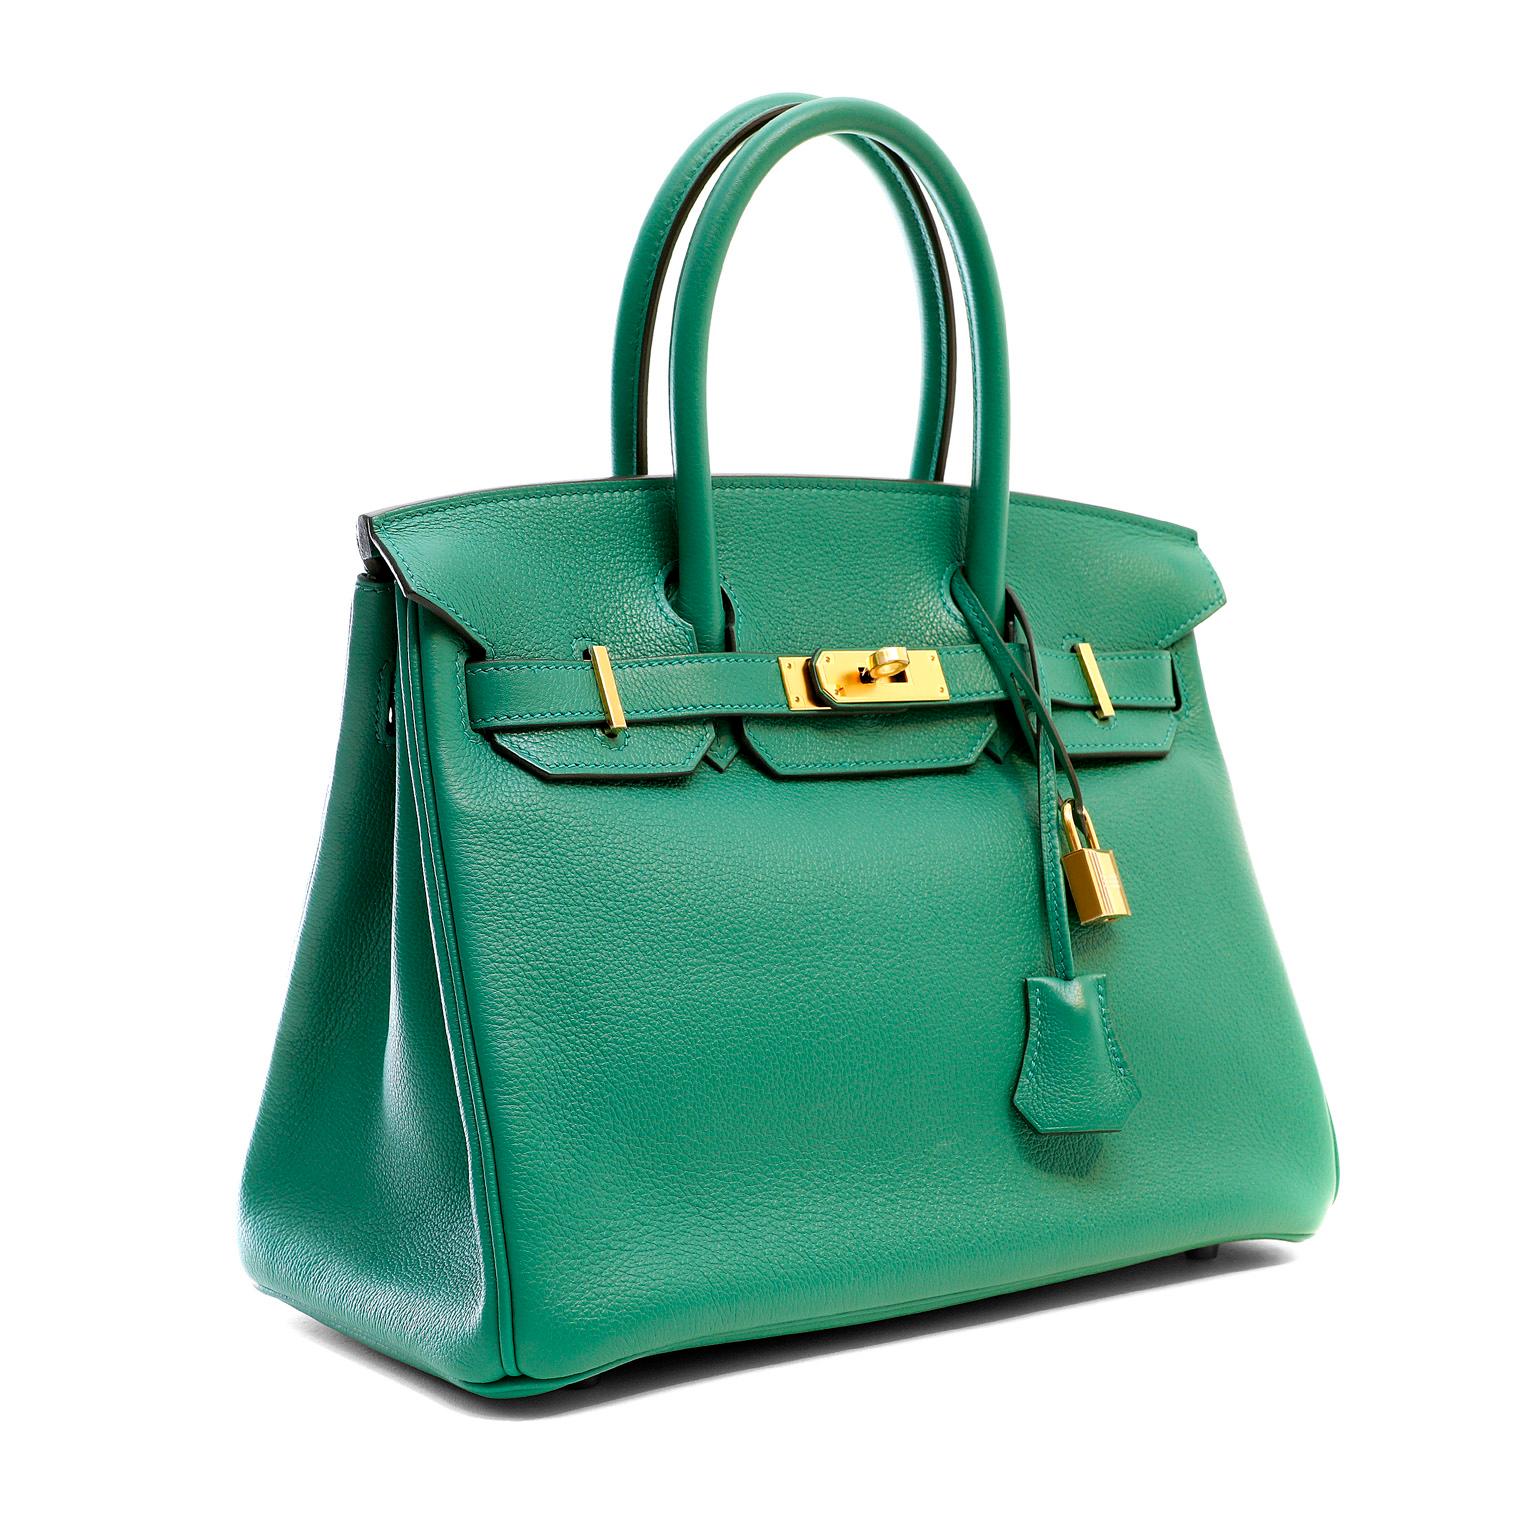 This authentic Hermès Emerald Green Evergrain 30 cm Birkin is in pristine unworn condition.  The protective plastic is intact on the hardware.  Hand sewn and coveted worldwide; the Hermès Birkin is considered the epitome of luxury handbags.